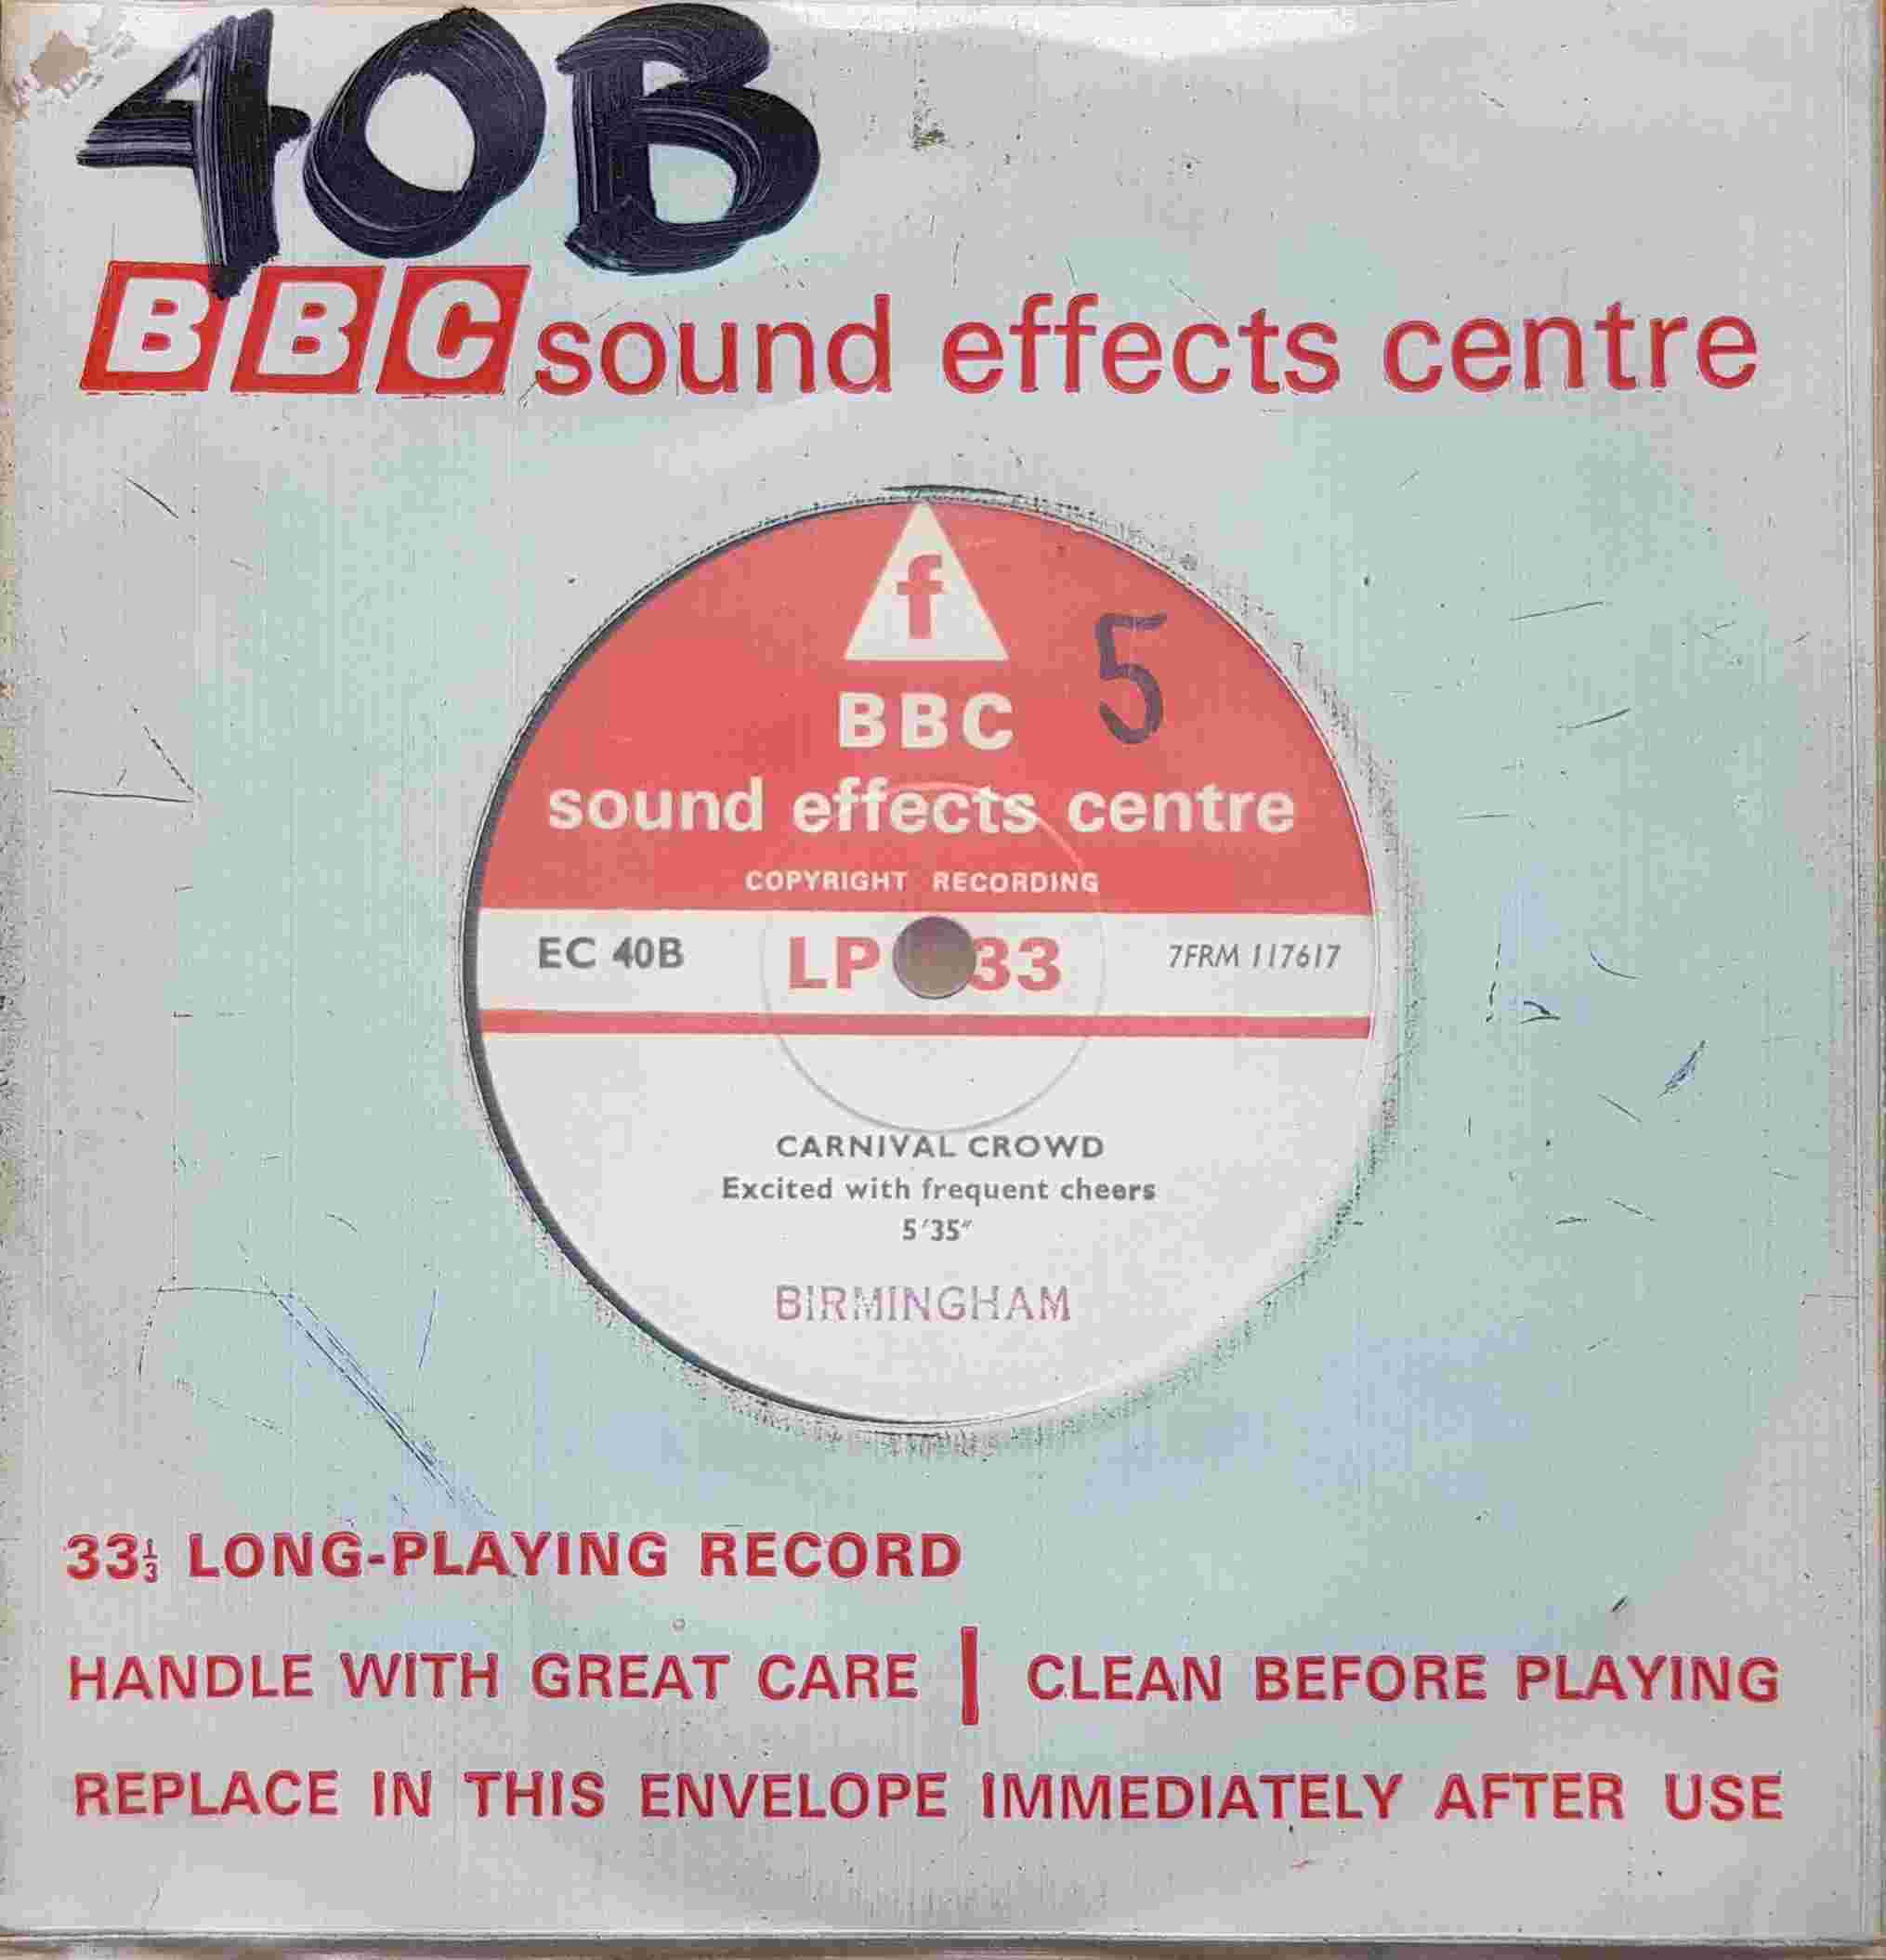 Picture of EC 40B Carnival crowd by artist Not registered from the BBC singles - Records and Tapes library